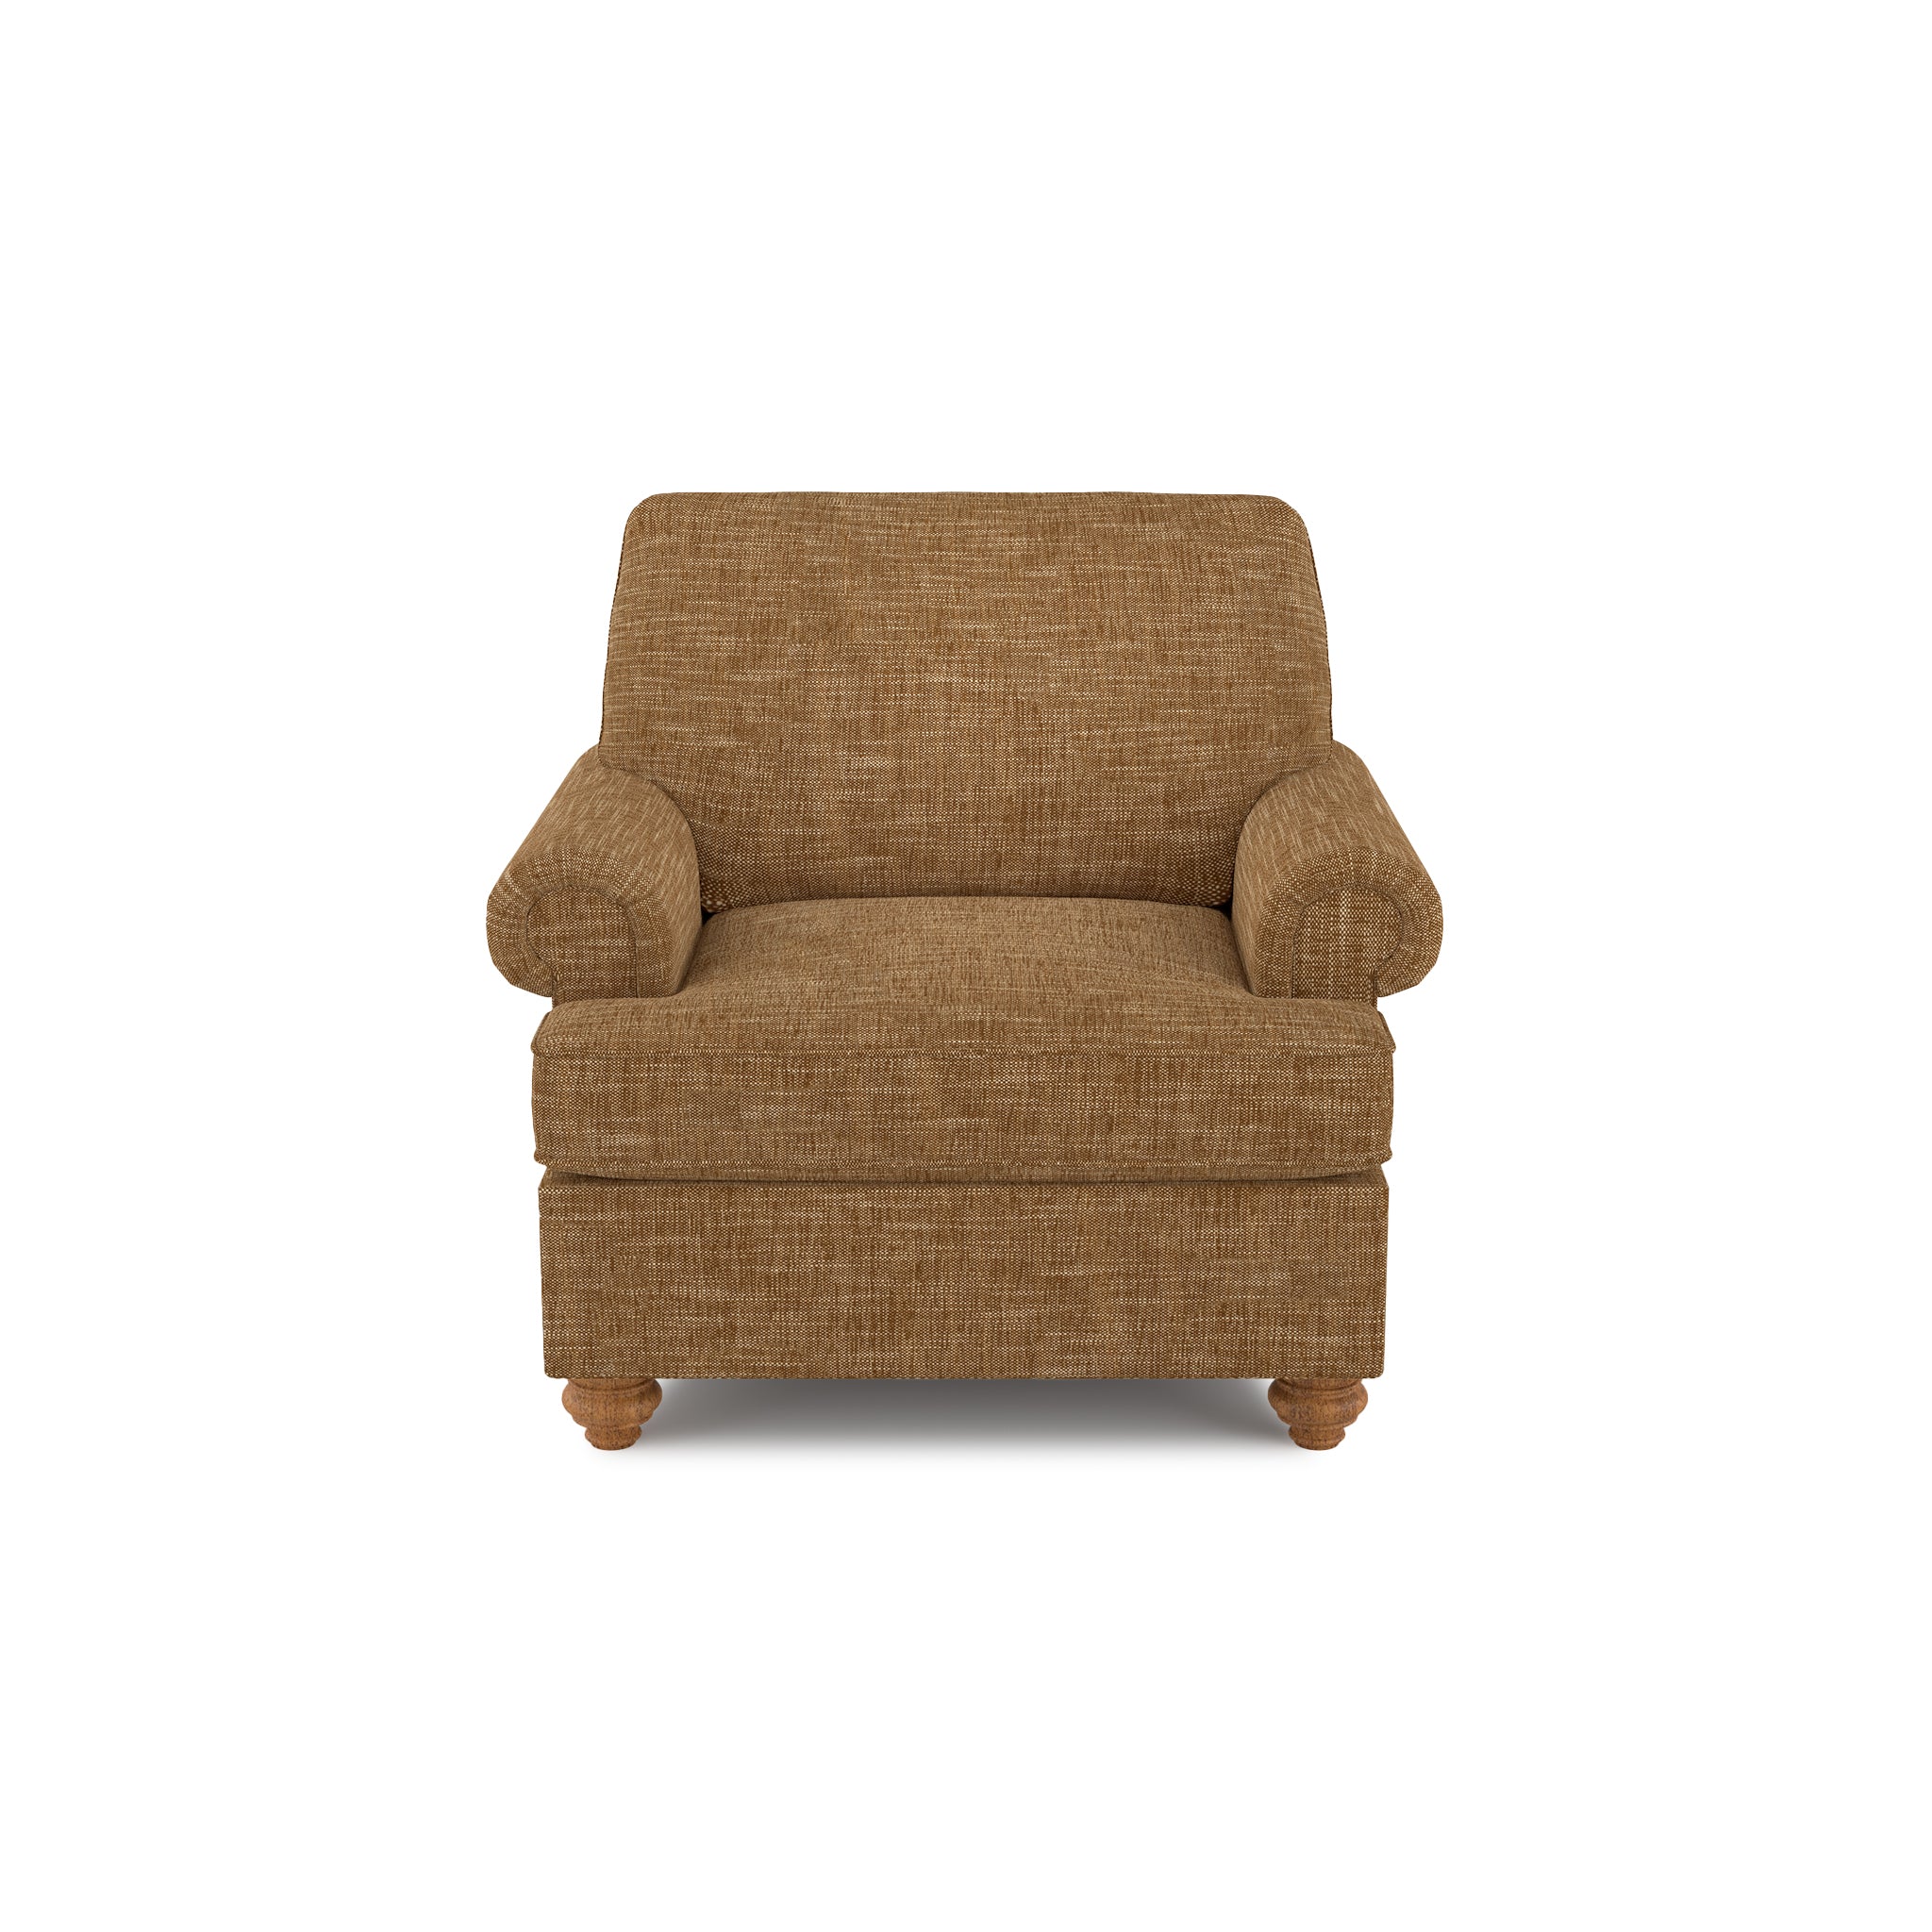 Woburn Manor Collection - Arm Chair